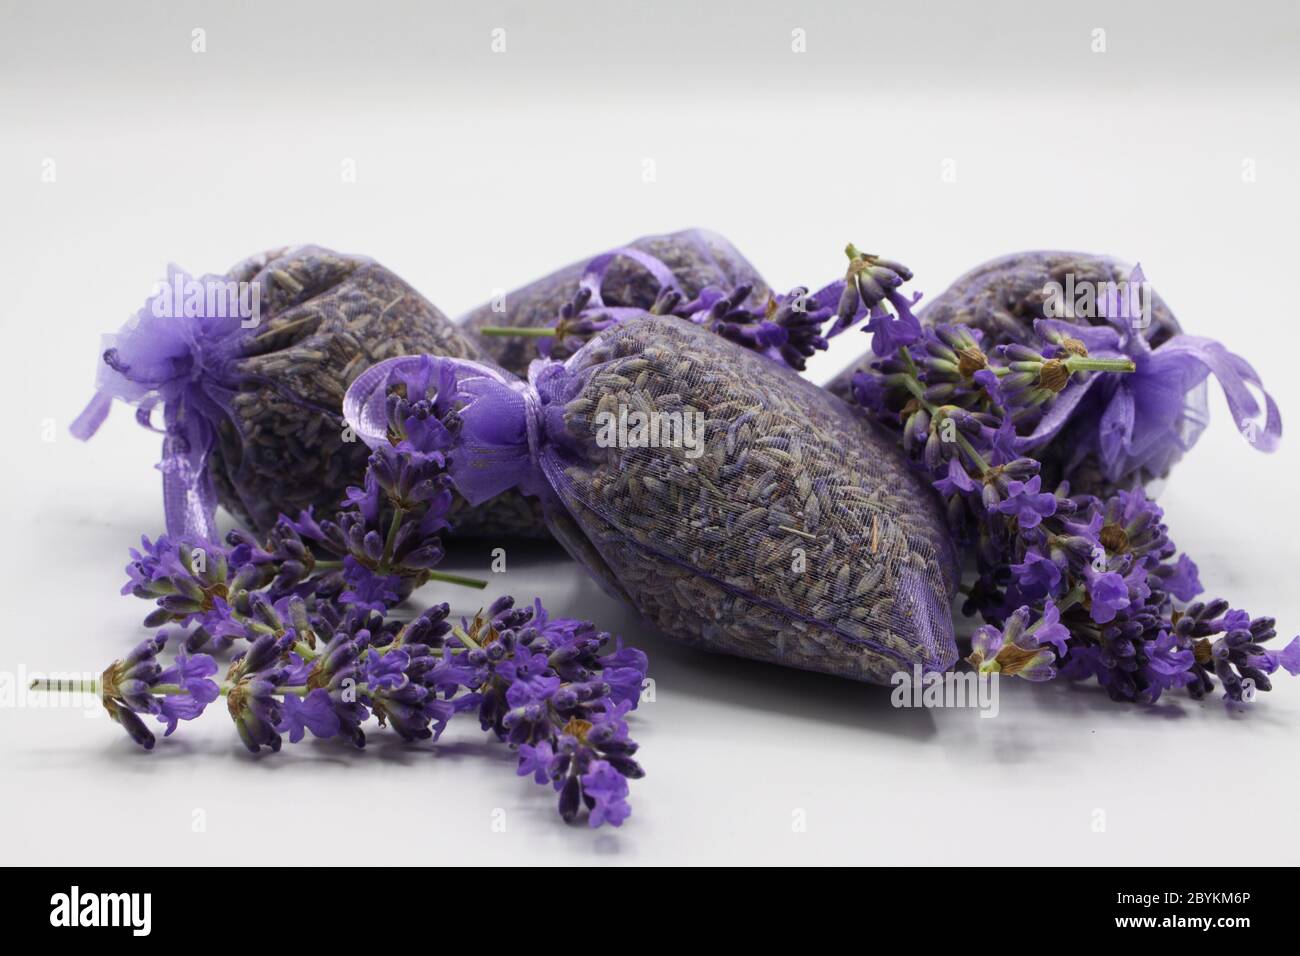 https://c8.alamy.com/comp/2BYKM6P/close-up-of-isolated-bagged-dried-lavender-blossom-sacs-used-as-moth-repellent-in-wardrobe-for-clothes-protection-white-background-2BYKM6P.jpg